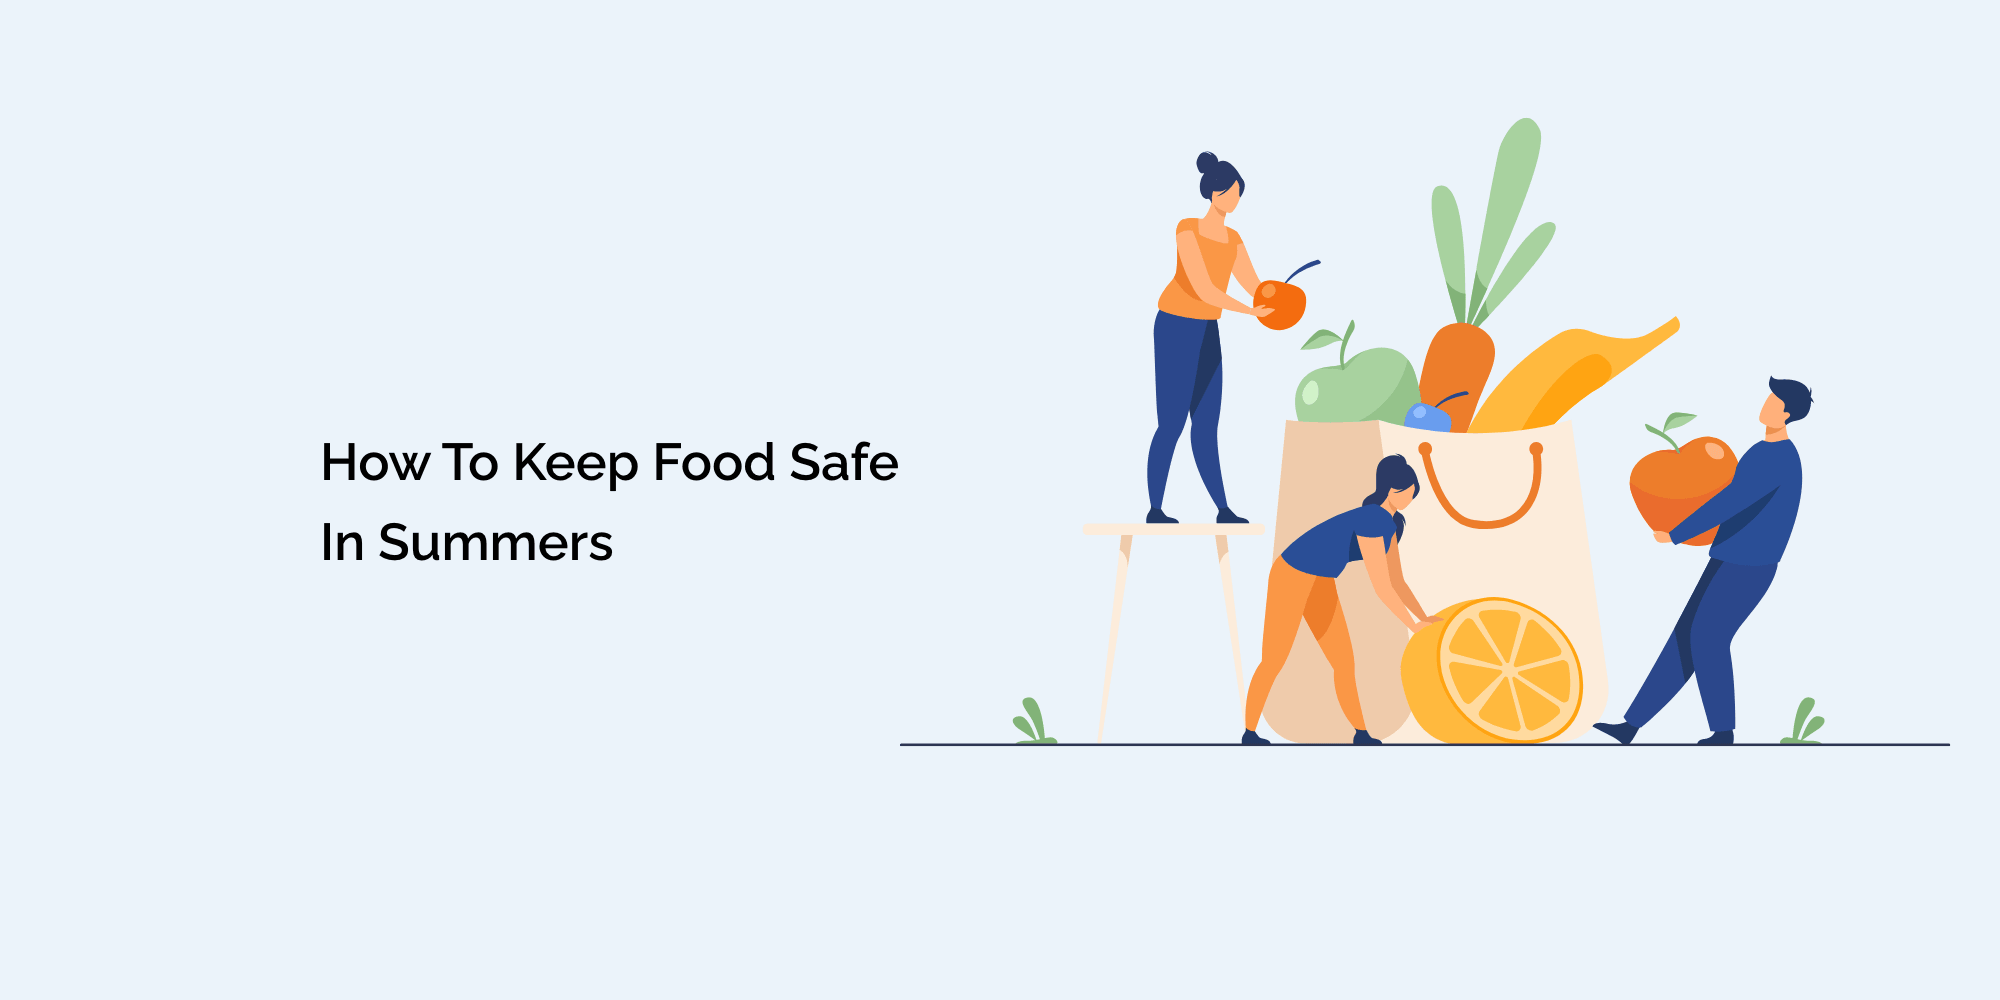 How to keep food safe in summers